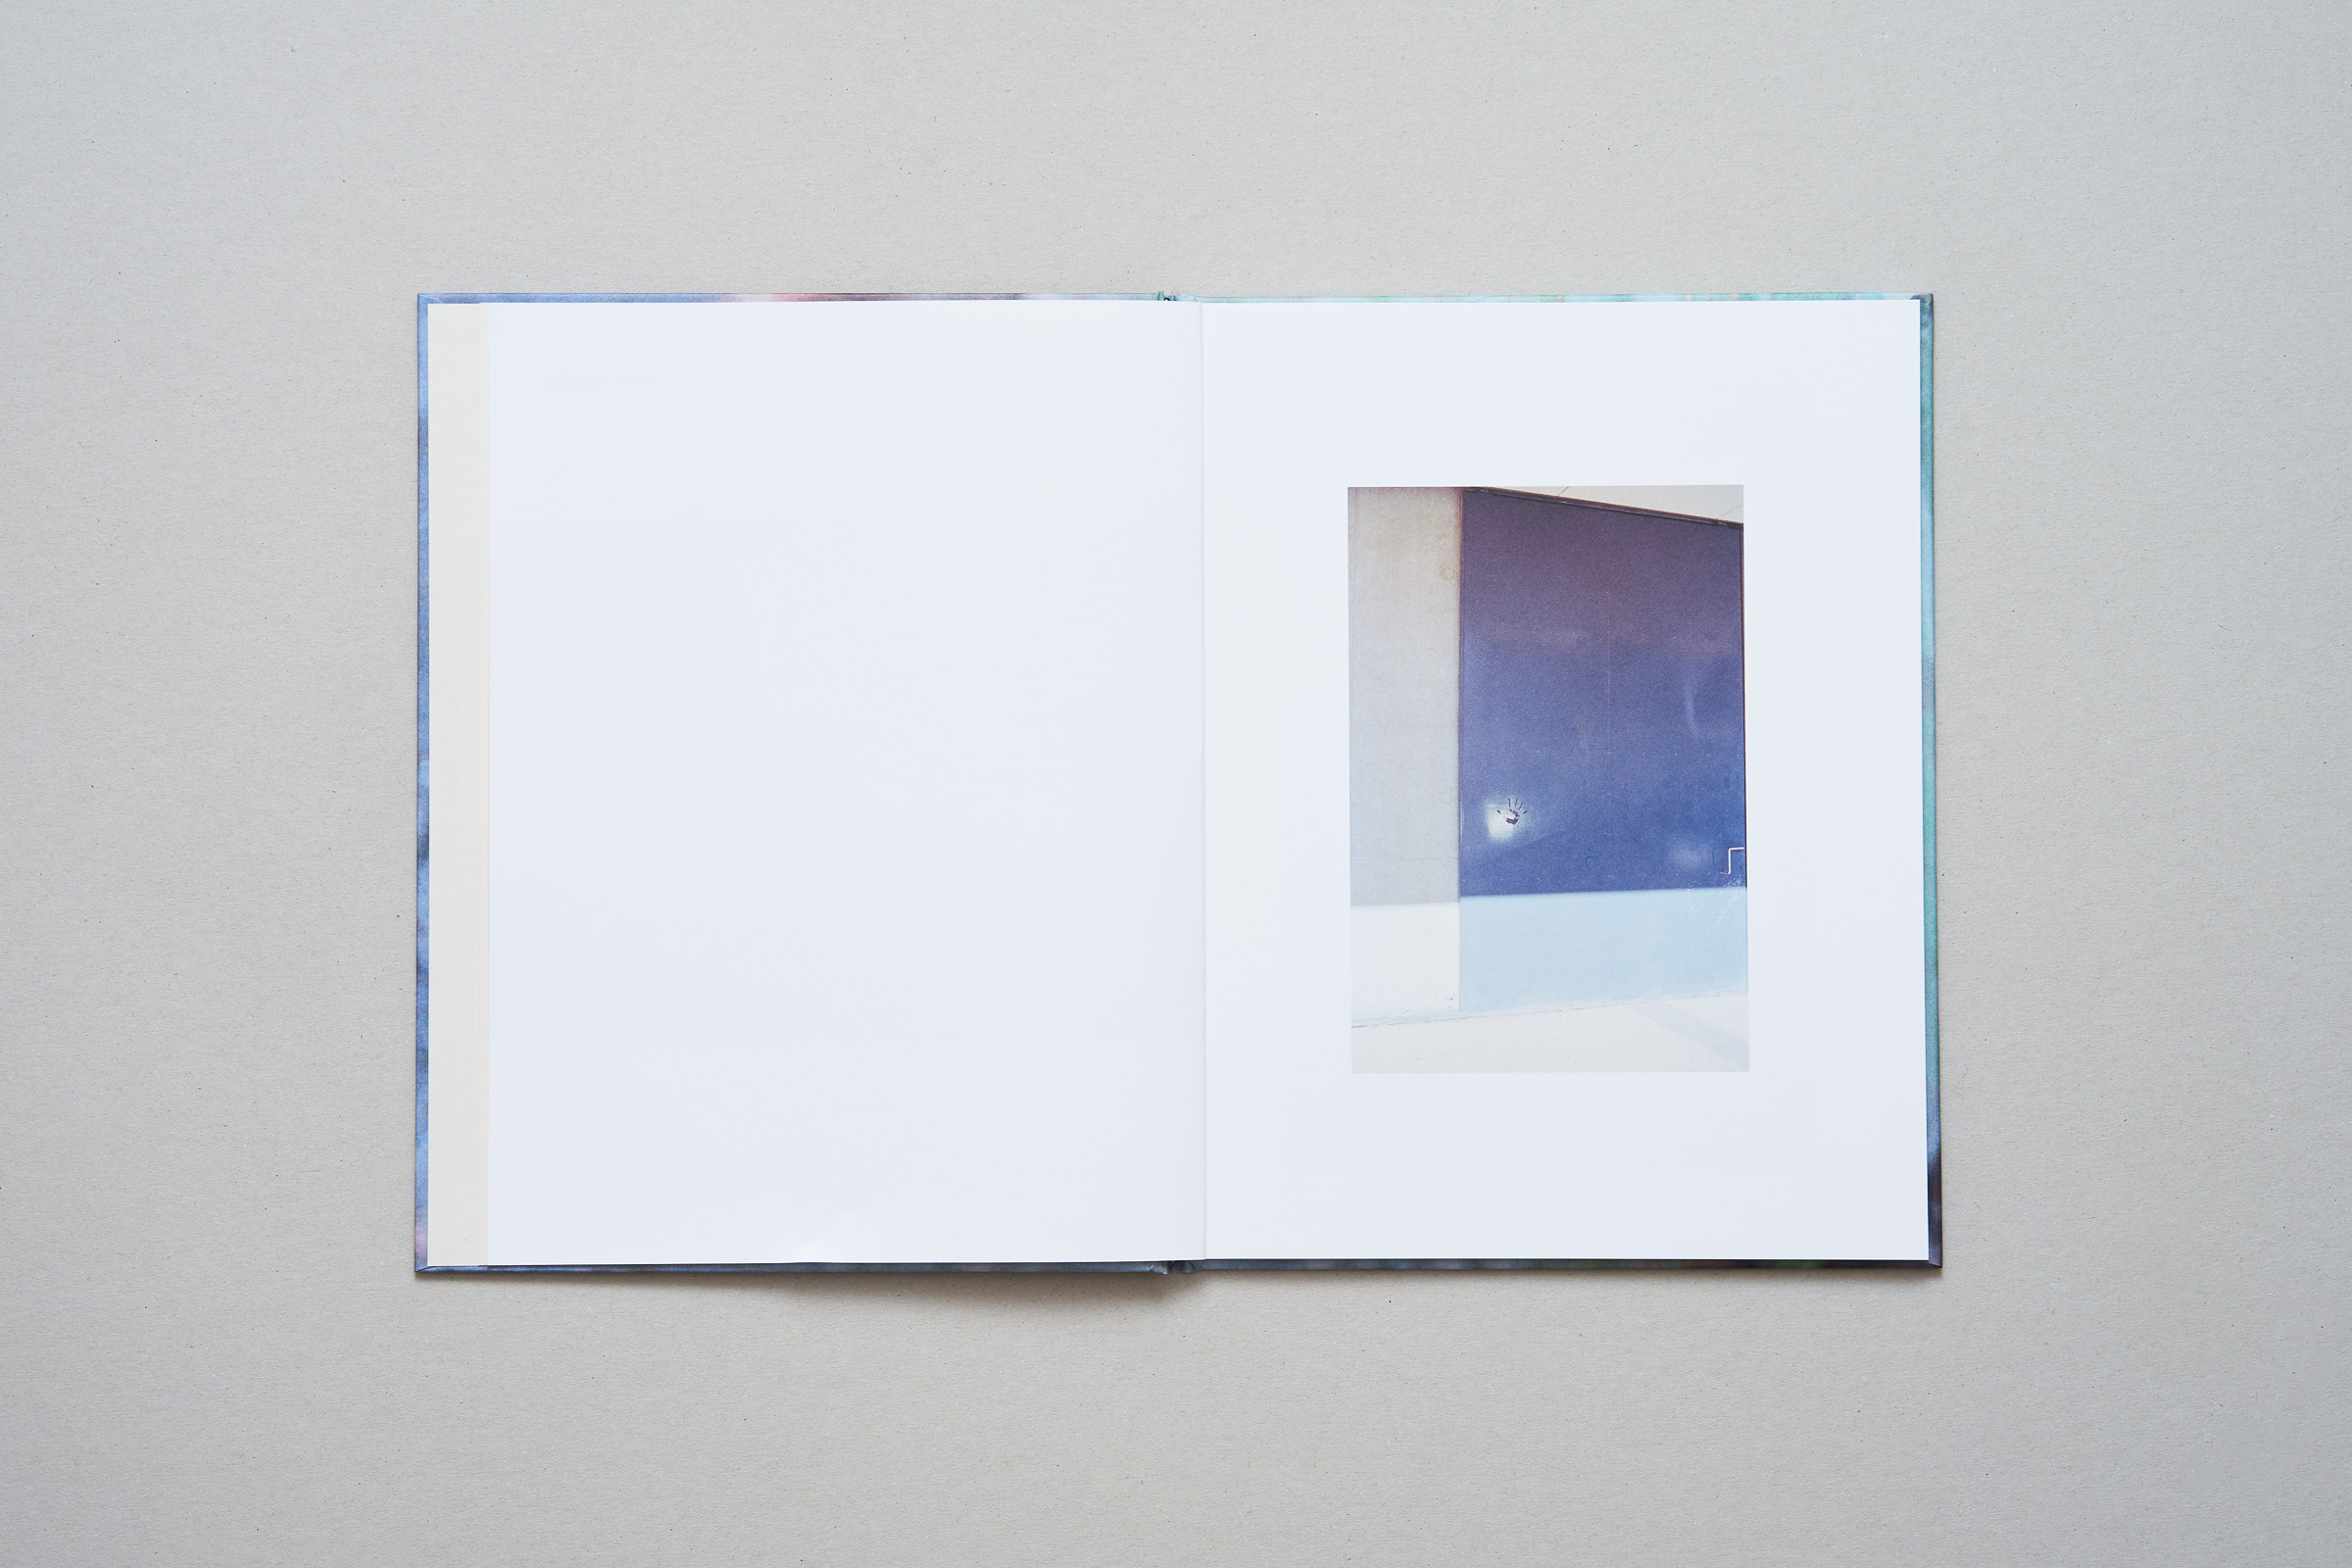 Ola Rindal — Notes on Ordinary Spaces